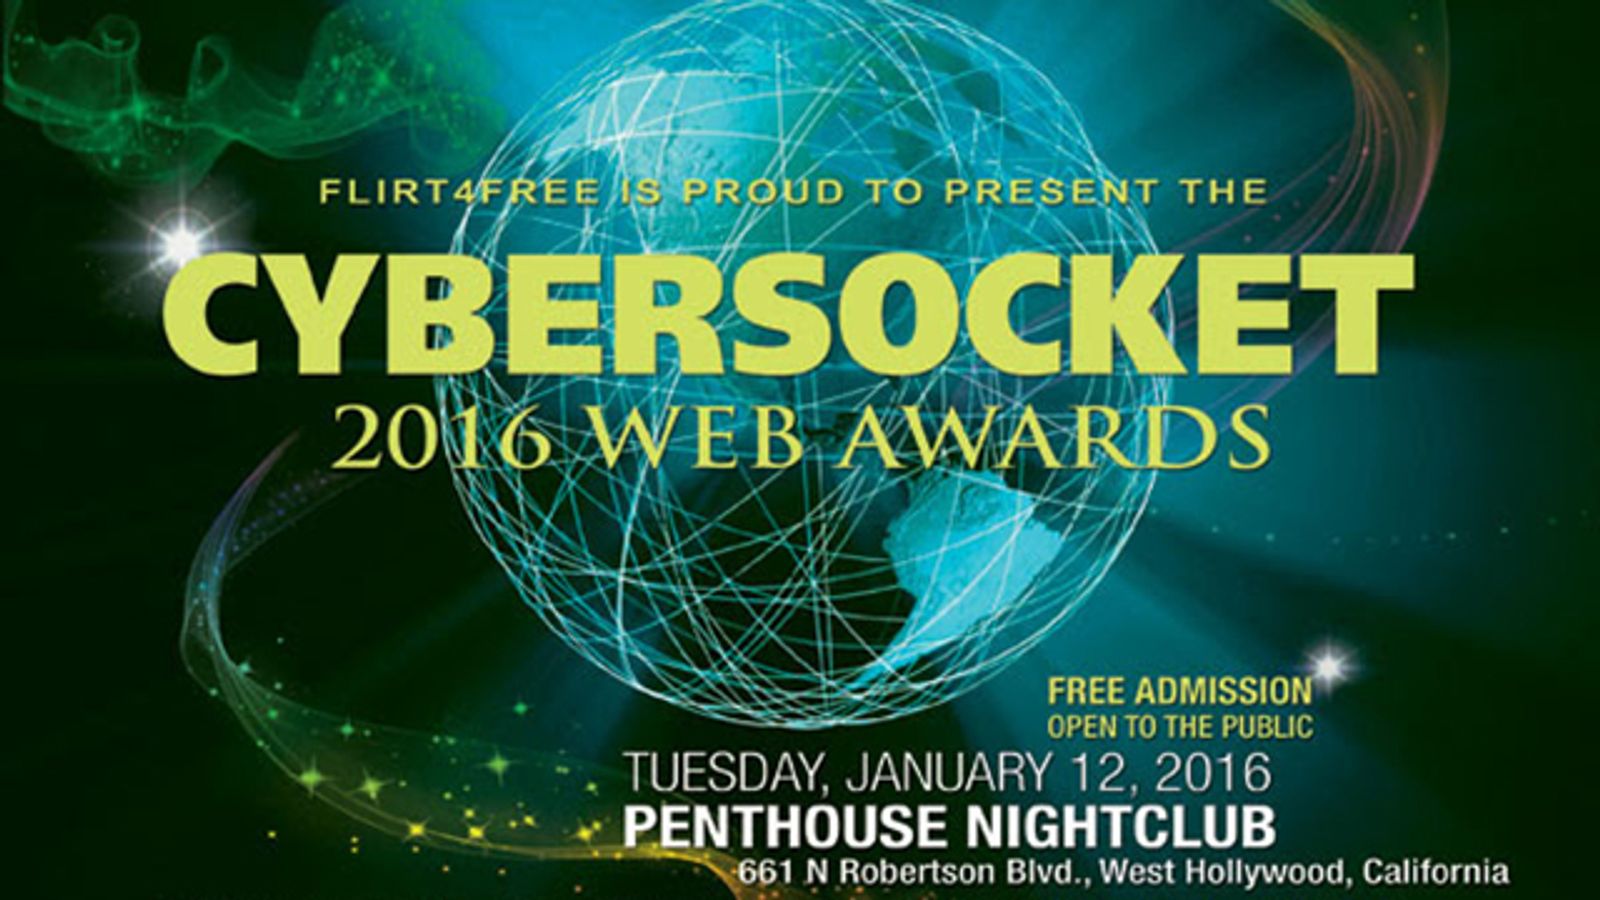 16th Annual Cybersocket Web Awards To Take Place Jan. 12